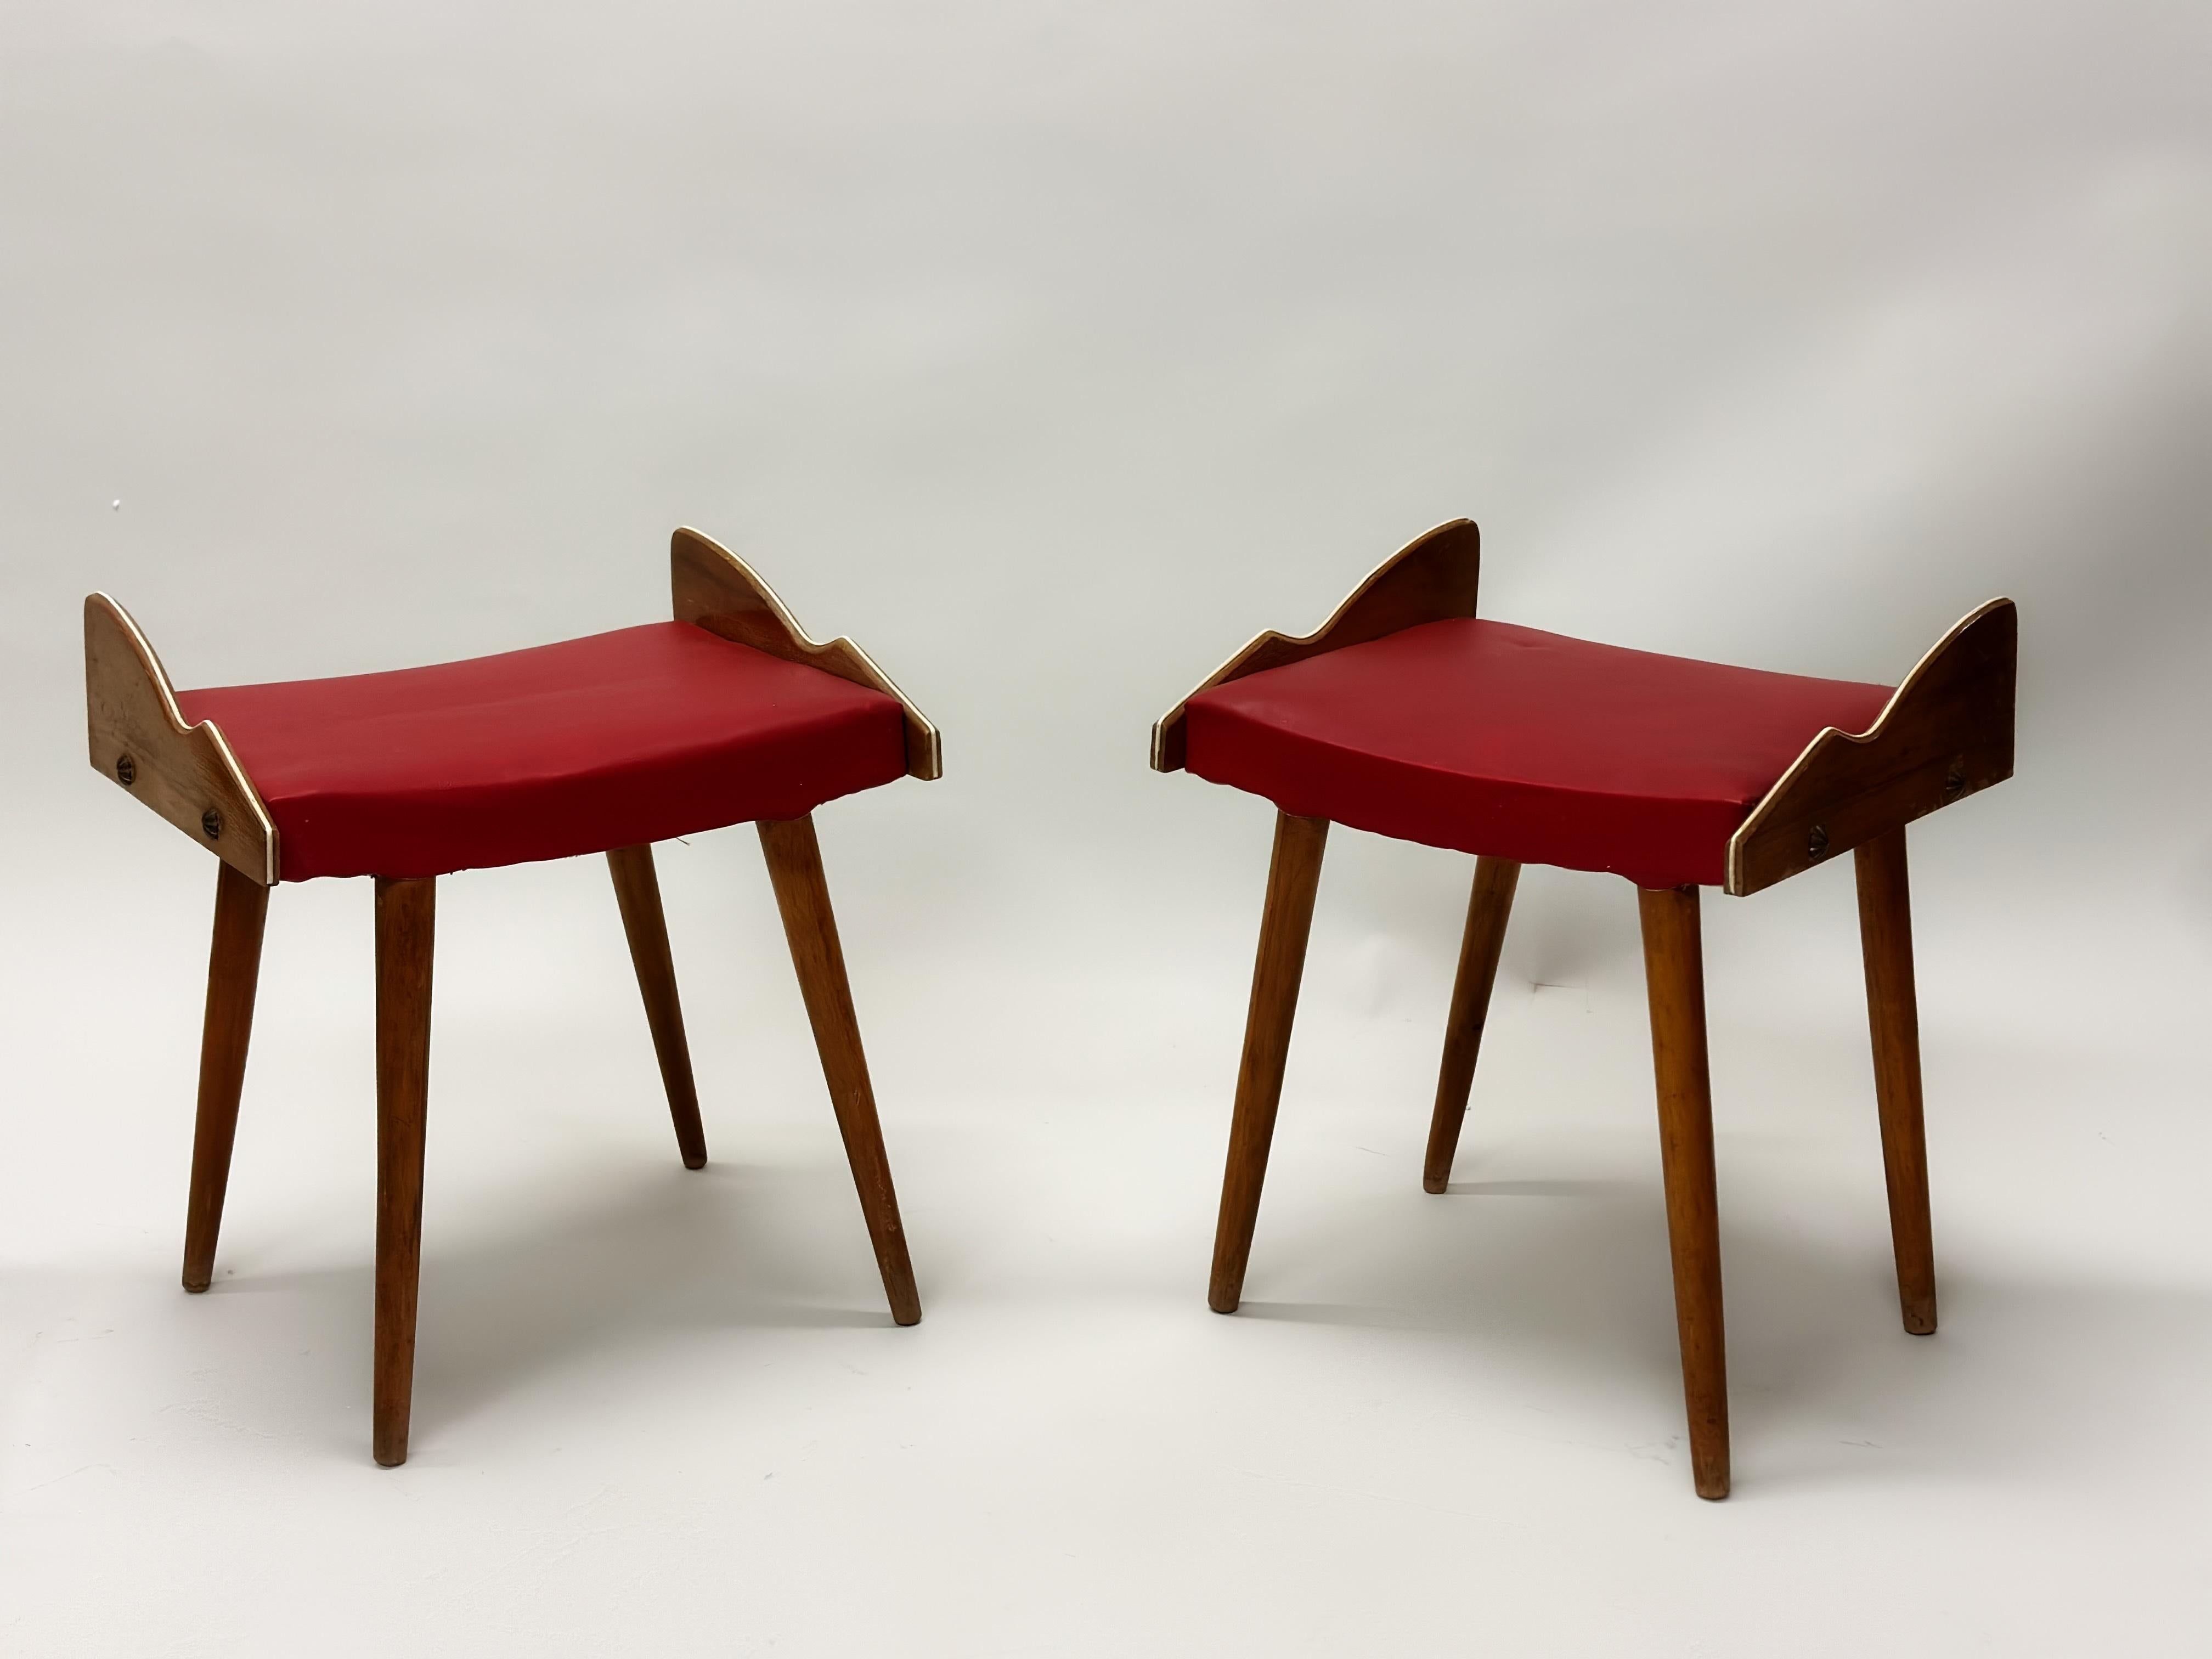 Pair of Italian Mid-Century Modern Wood Benches / Stools Attributed to Gio Ponti For Sale 2